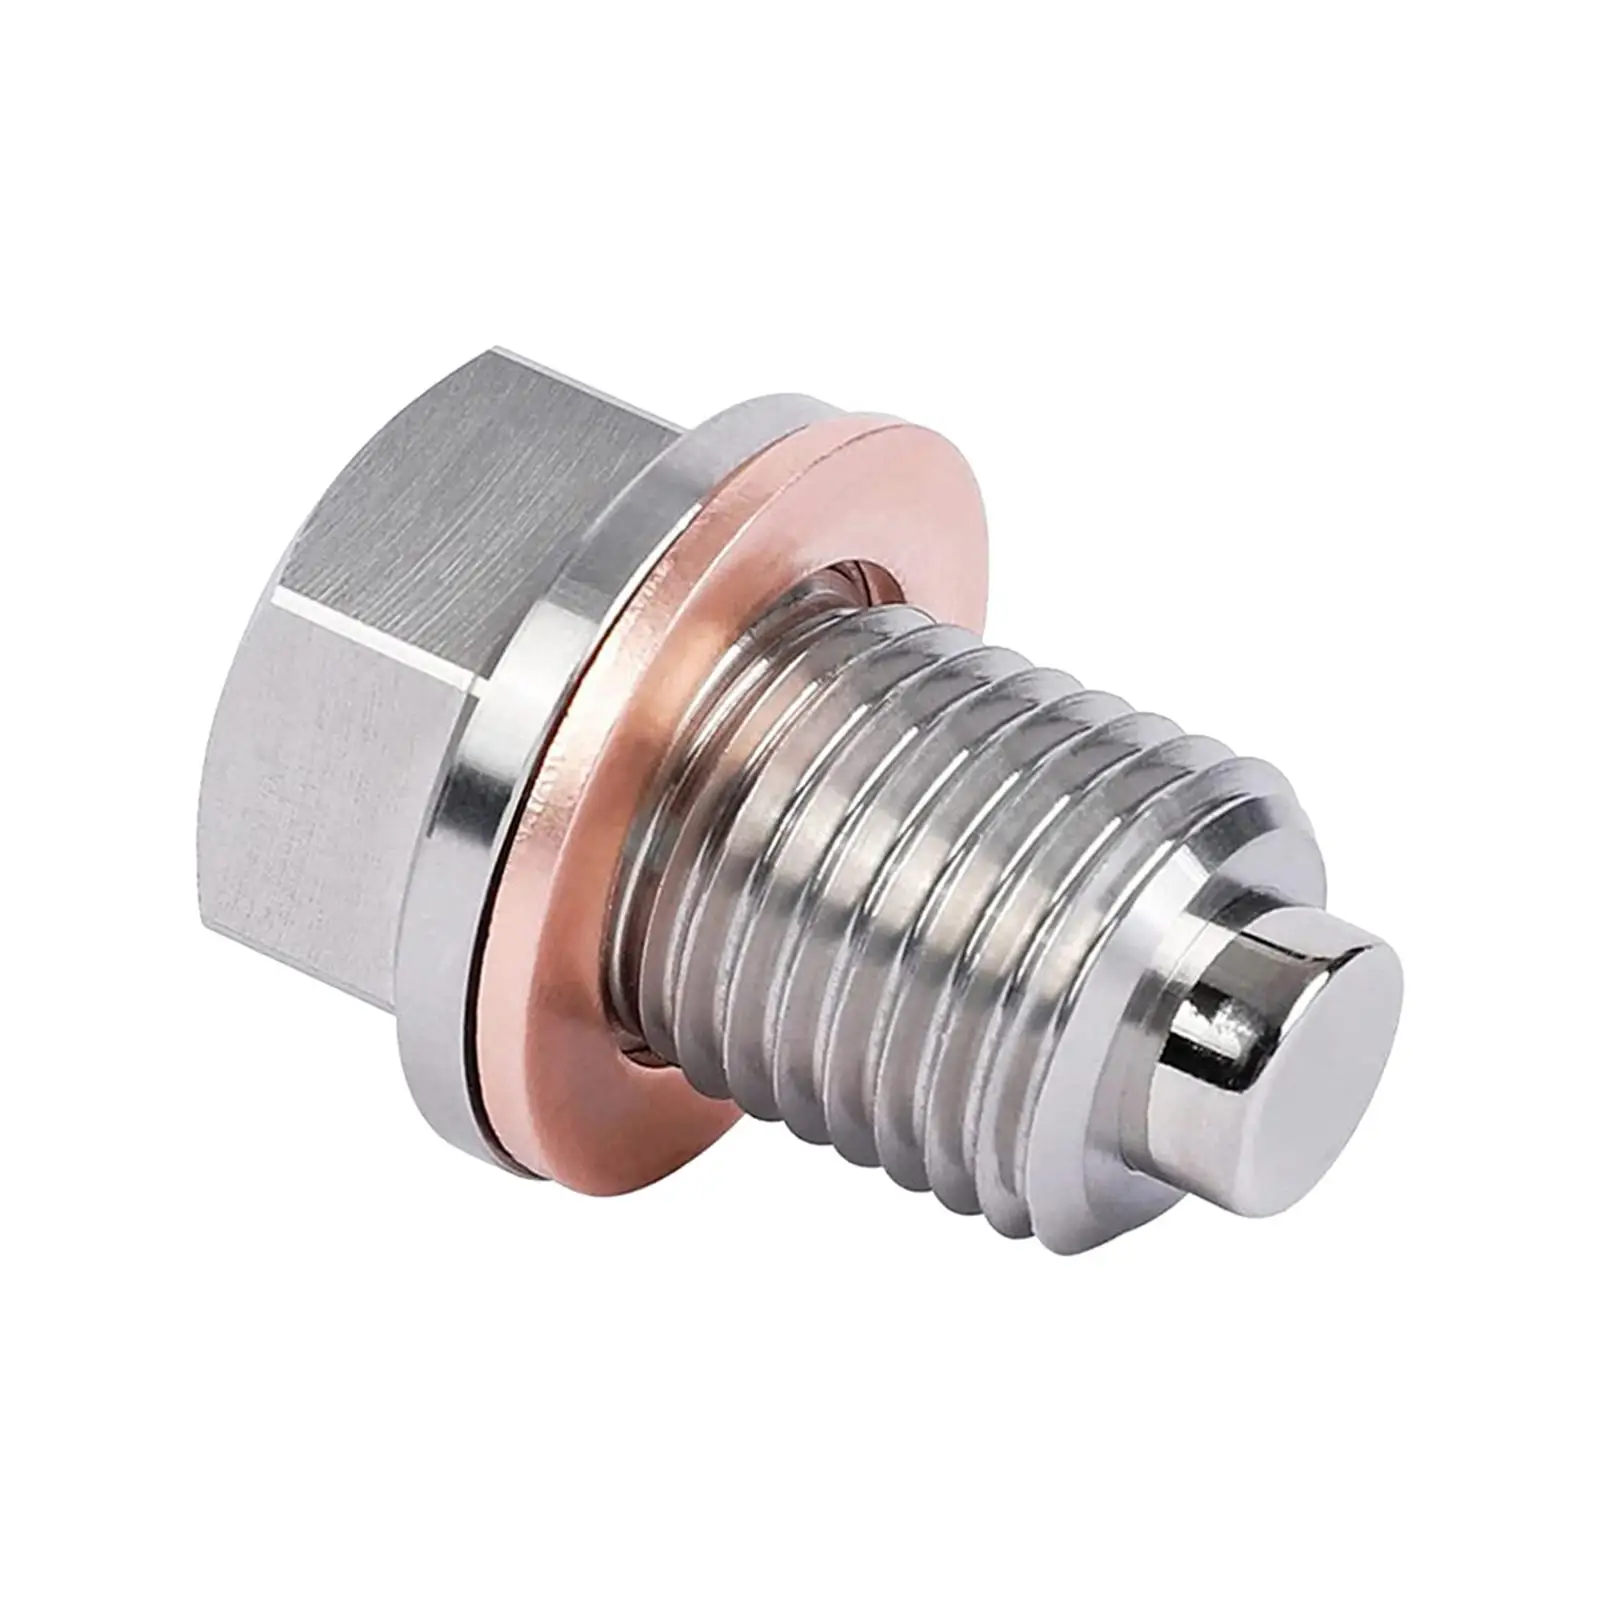 Oil Drain Plug Screw M12x1.5 Replace Accessory Easy to Install Sump Drain Nut